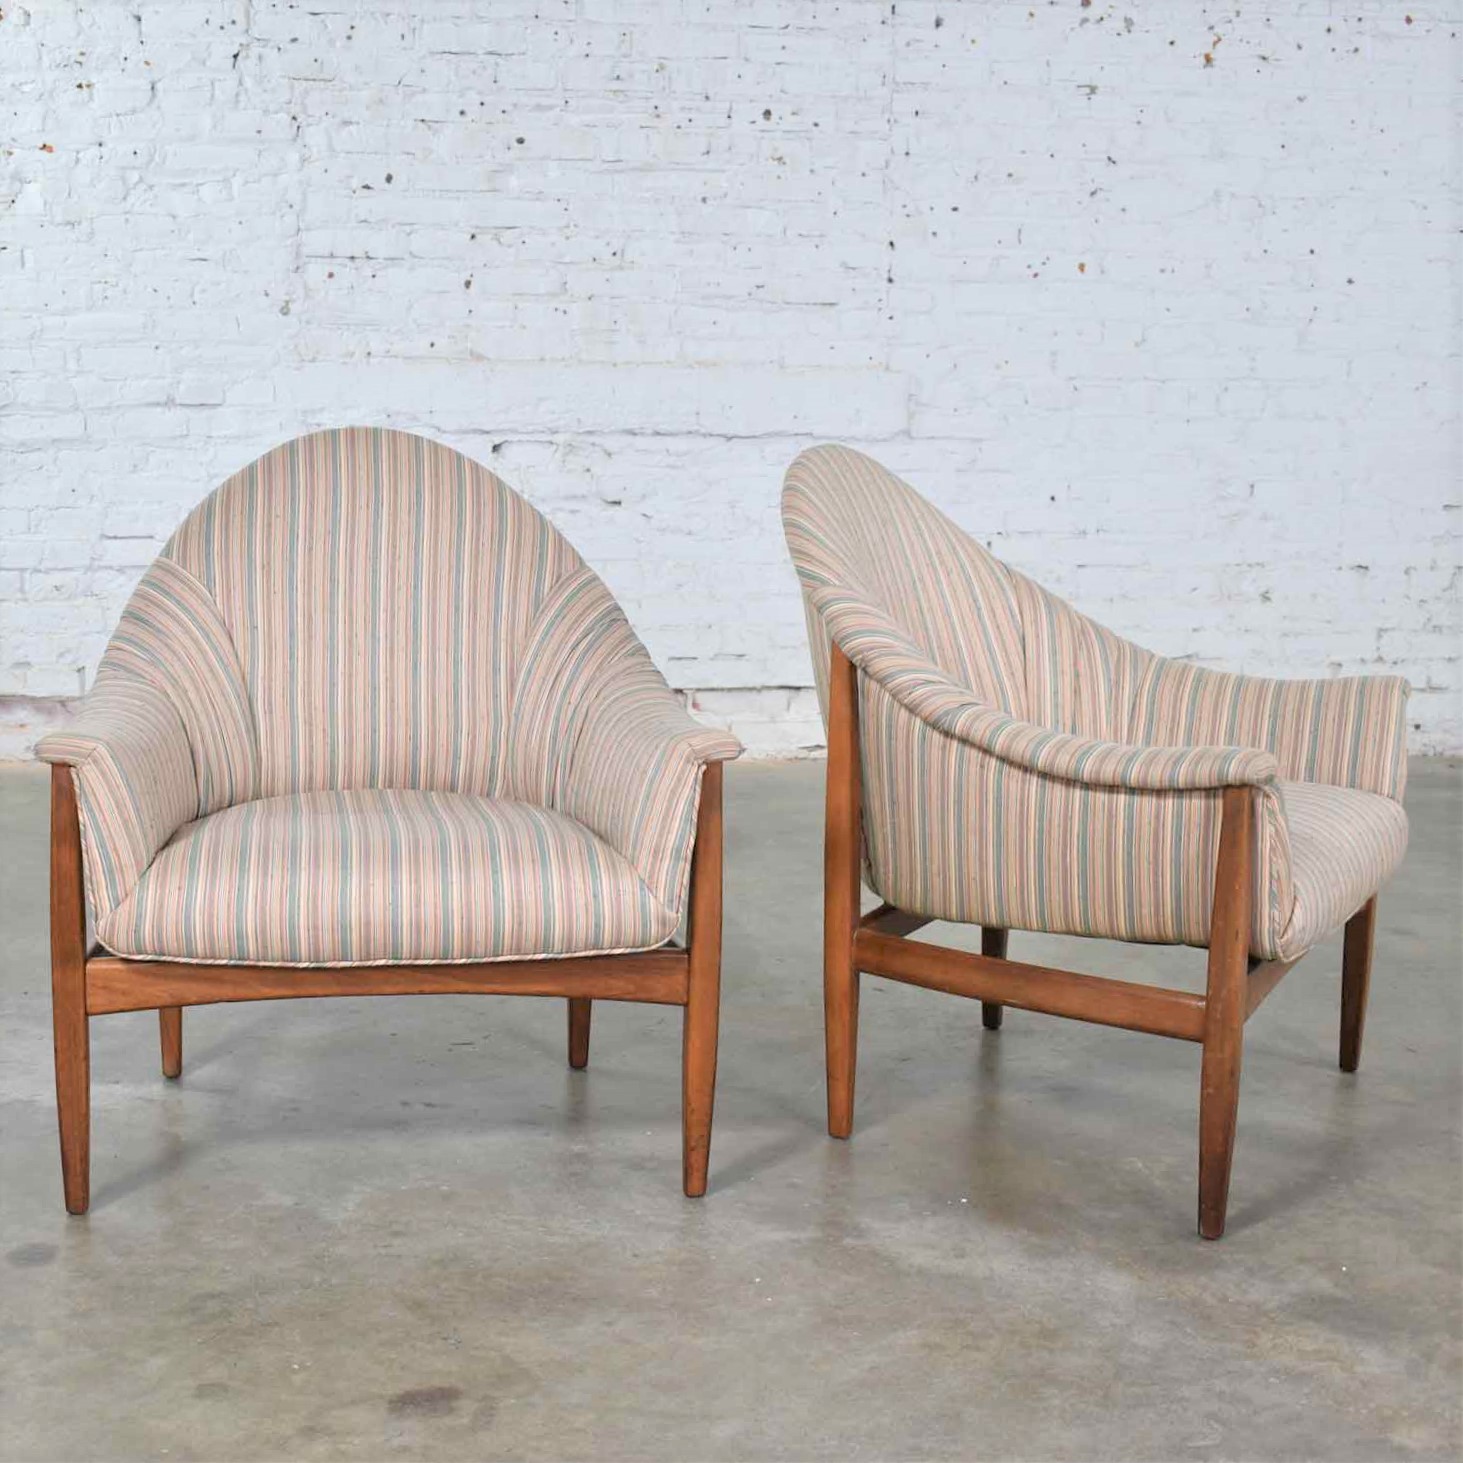 Pair Mid Century Modern Petite Tub Chairs Attributed to Thayer Coggin